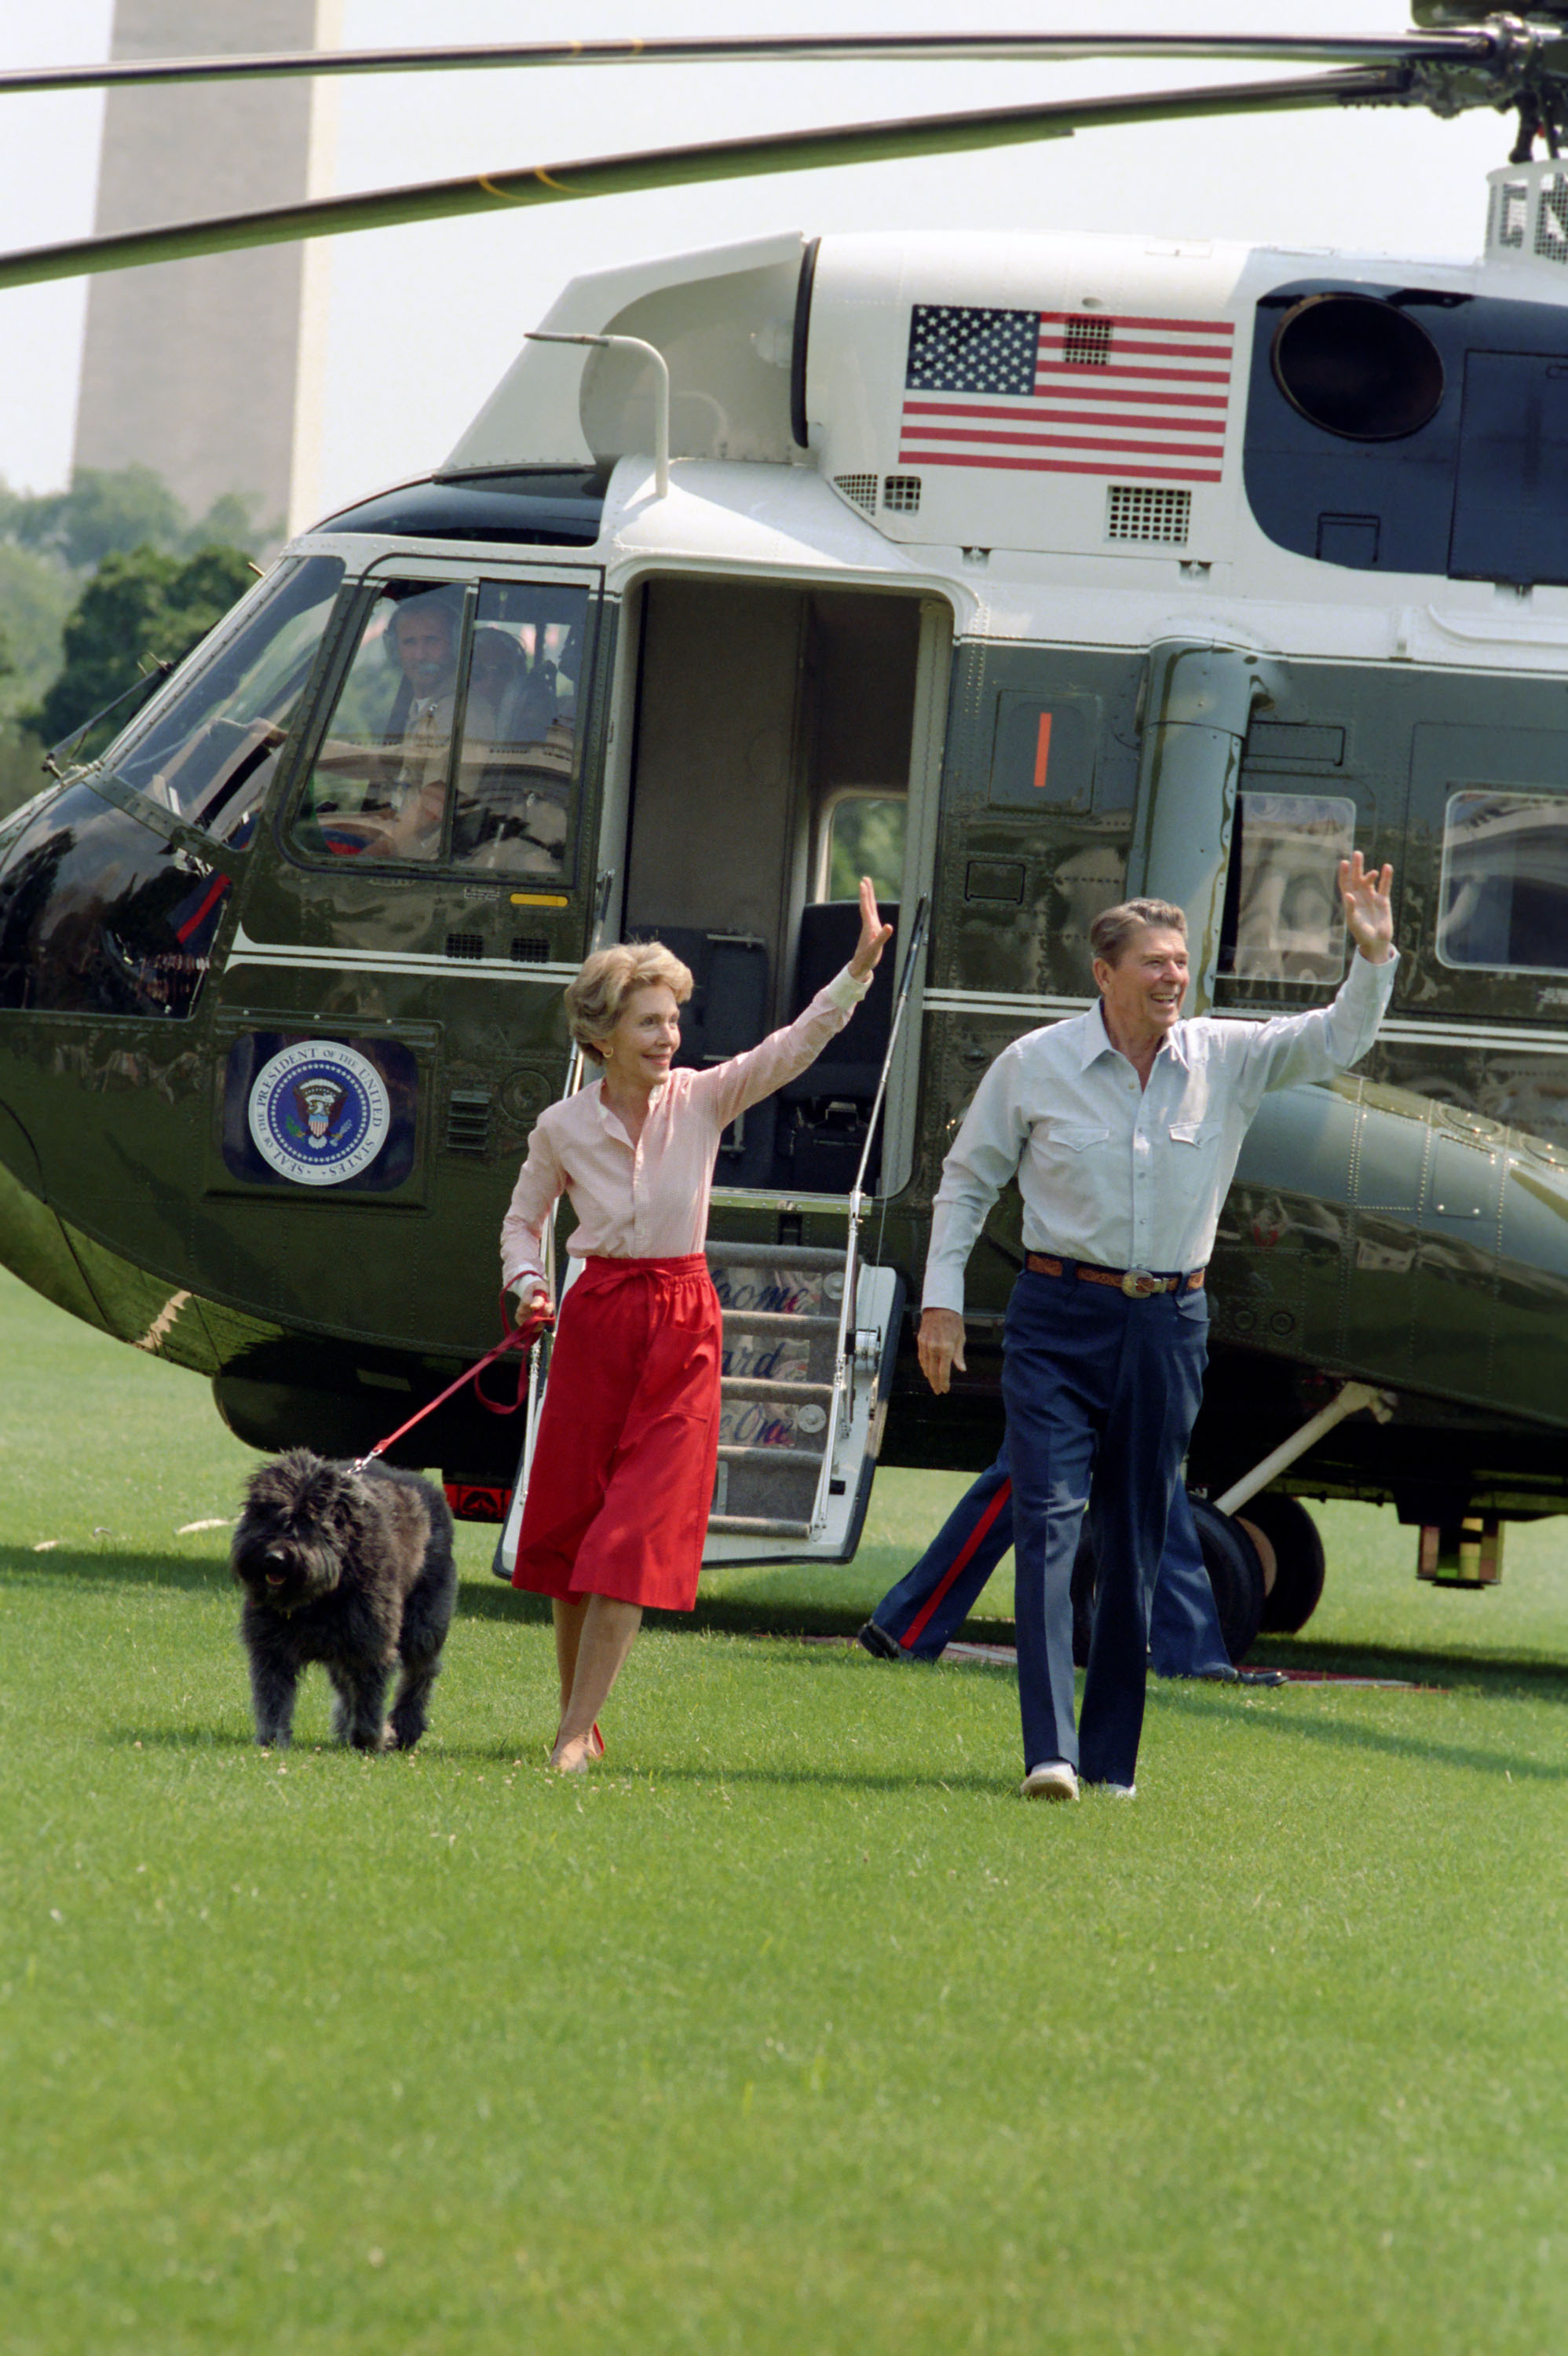 8/4/1985 President Reagan Nancy Reagan and their dog "Lucky" on the South Lawn returning from trip to Camp David via Marine One